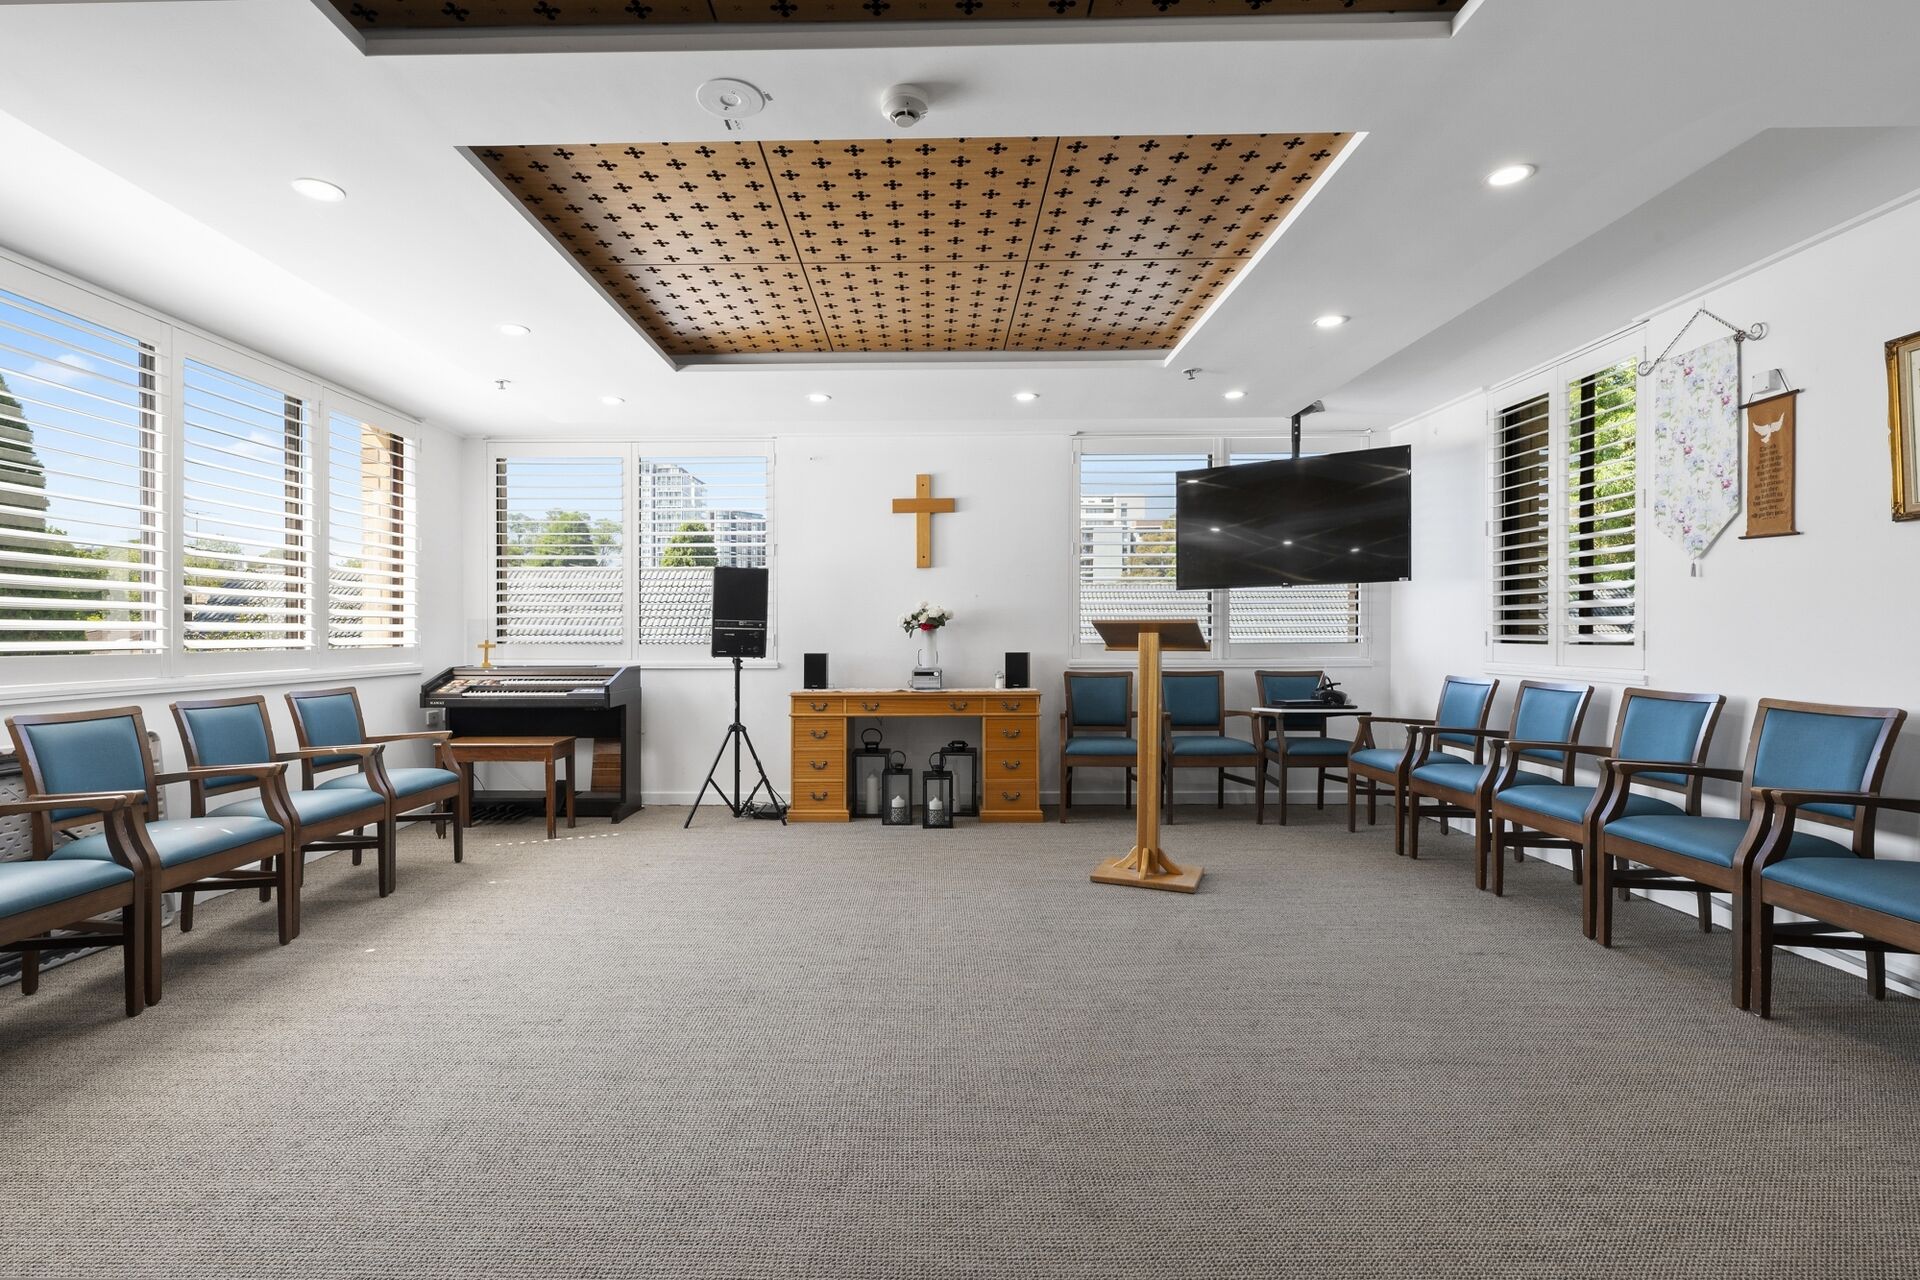 communal sitting space for aged care residents to socialise at baptistcare cooinda court residential aged care home in macquarie park northern sydney